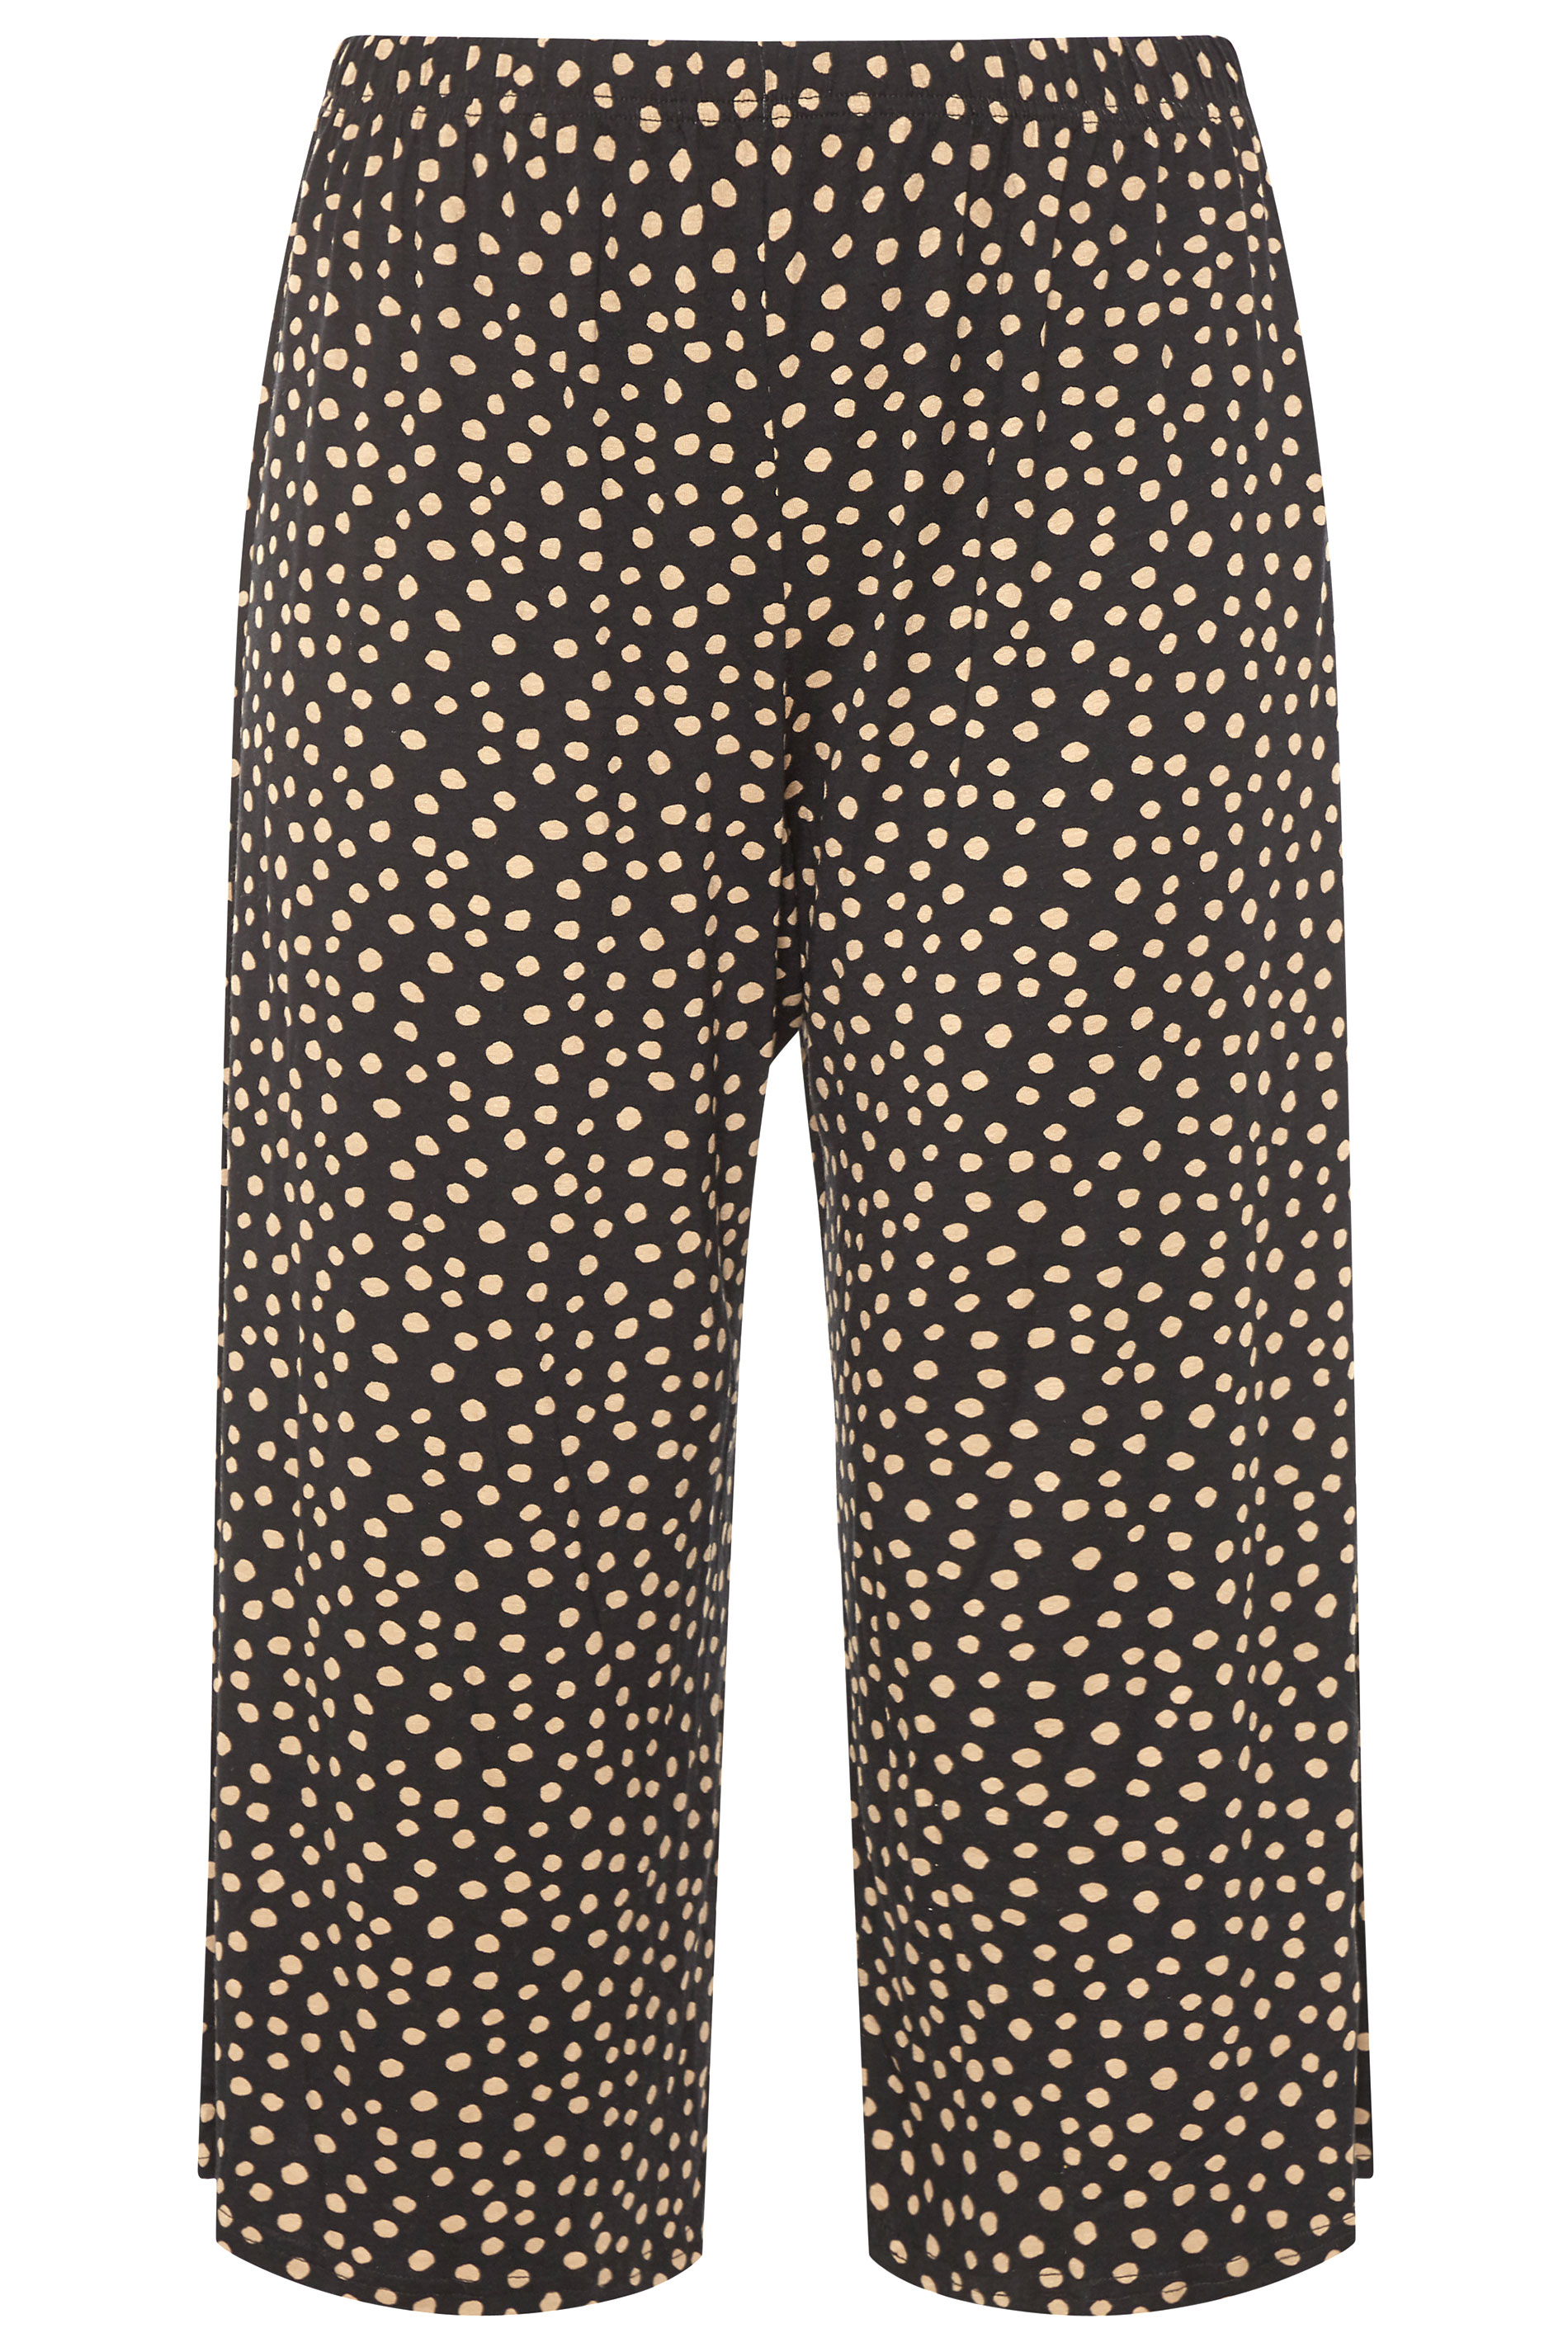 LIMITED COLLECTION Black & Brown Polka Dot Culottes | Yours Clothing